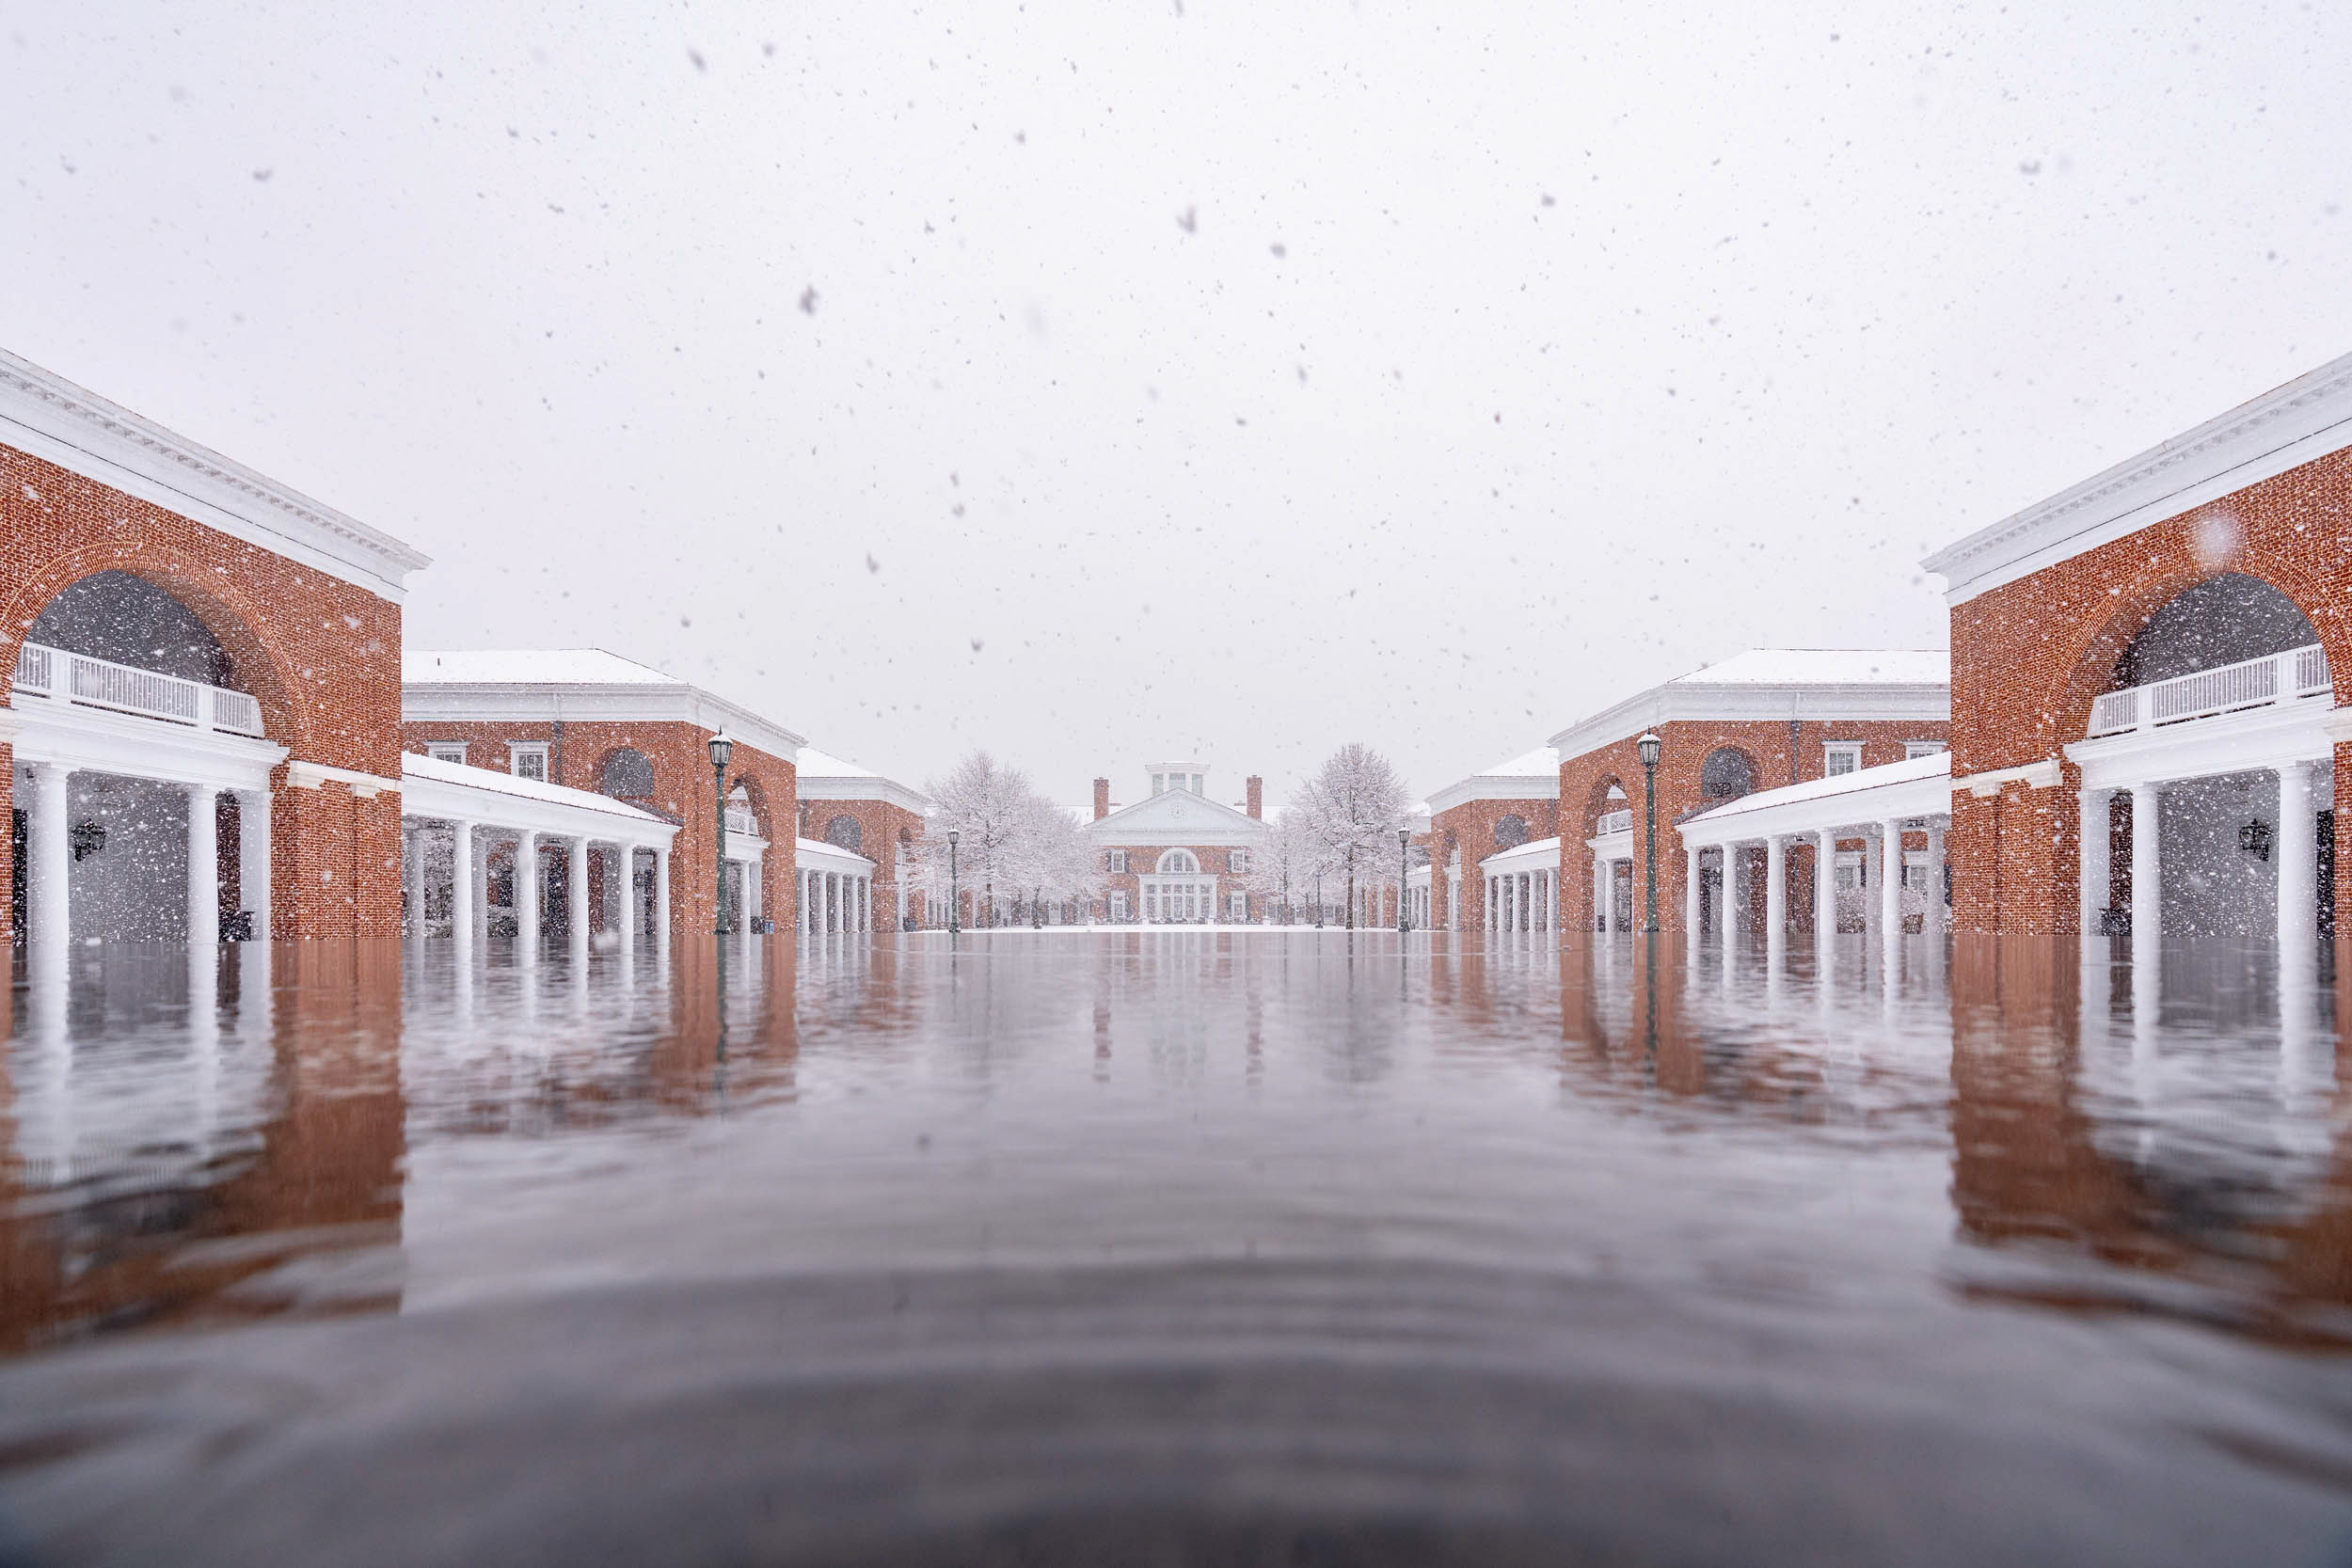 pooled water reflecting the brick buildings that borders it while snow is falling